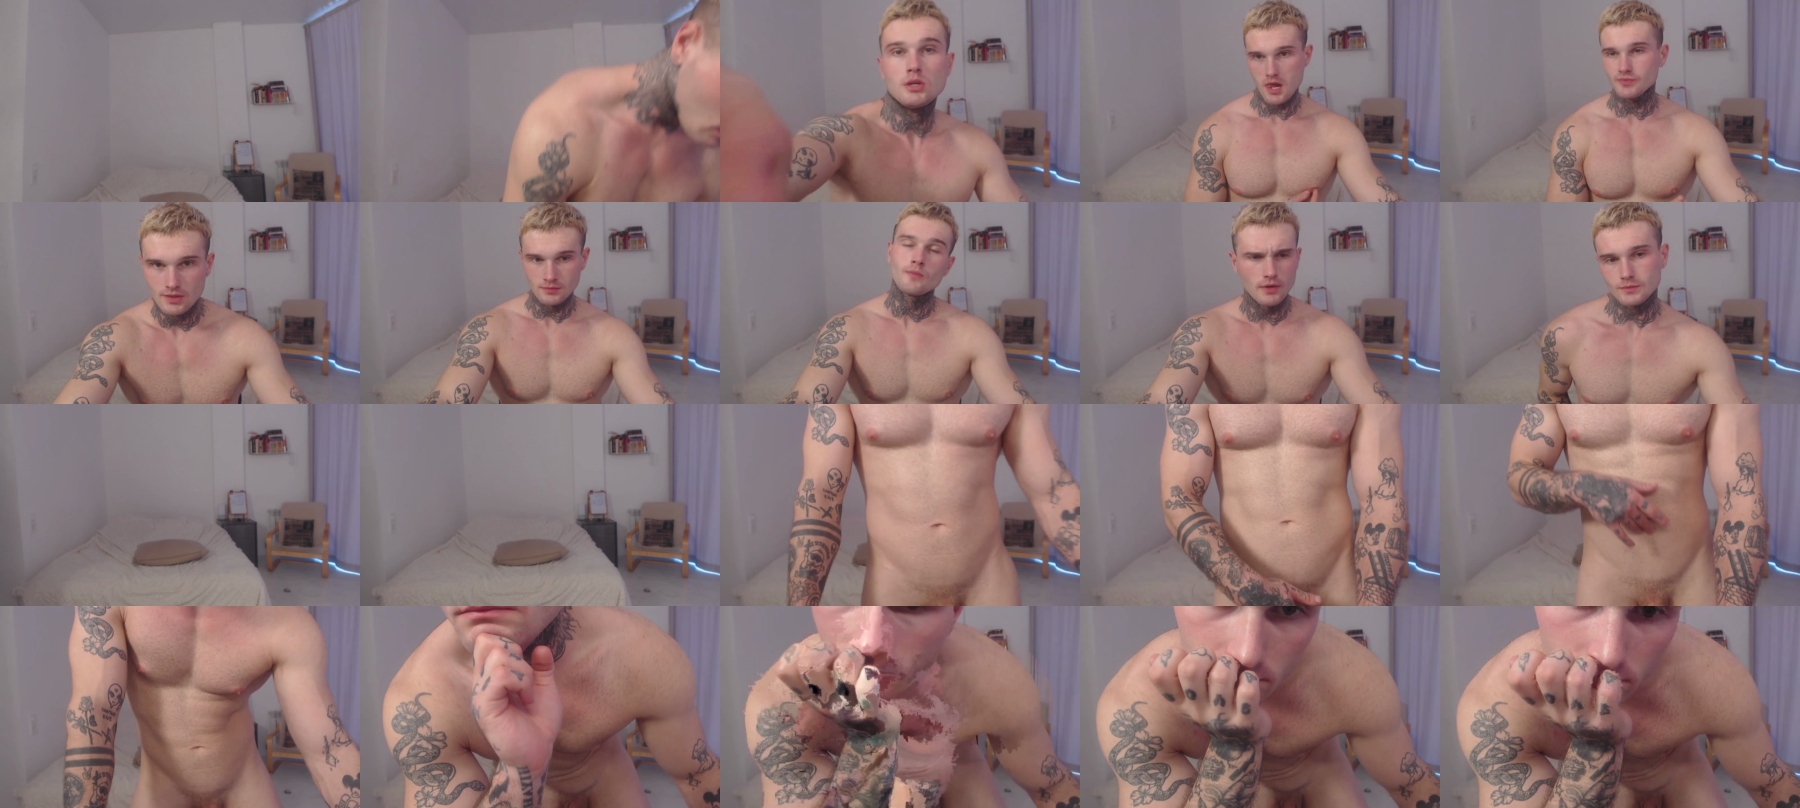 Andy_Hunk Porn CAM SHOW @ Chaturbate 13-11-2021